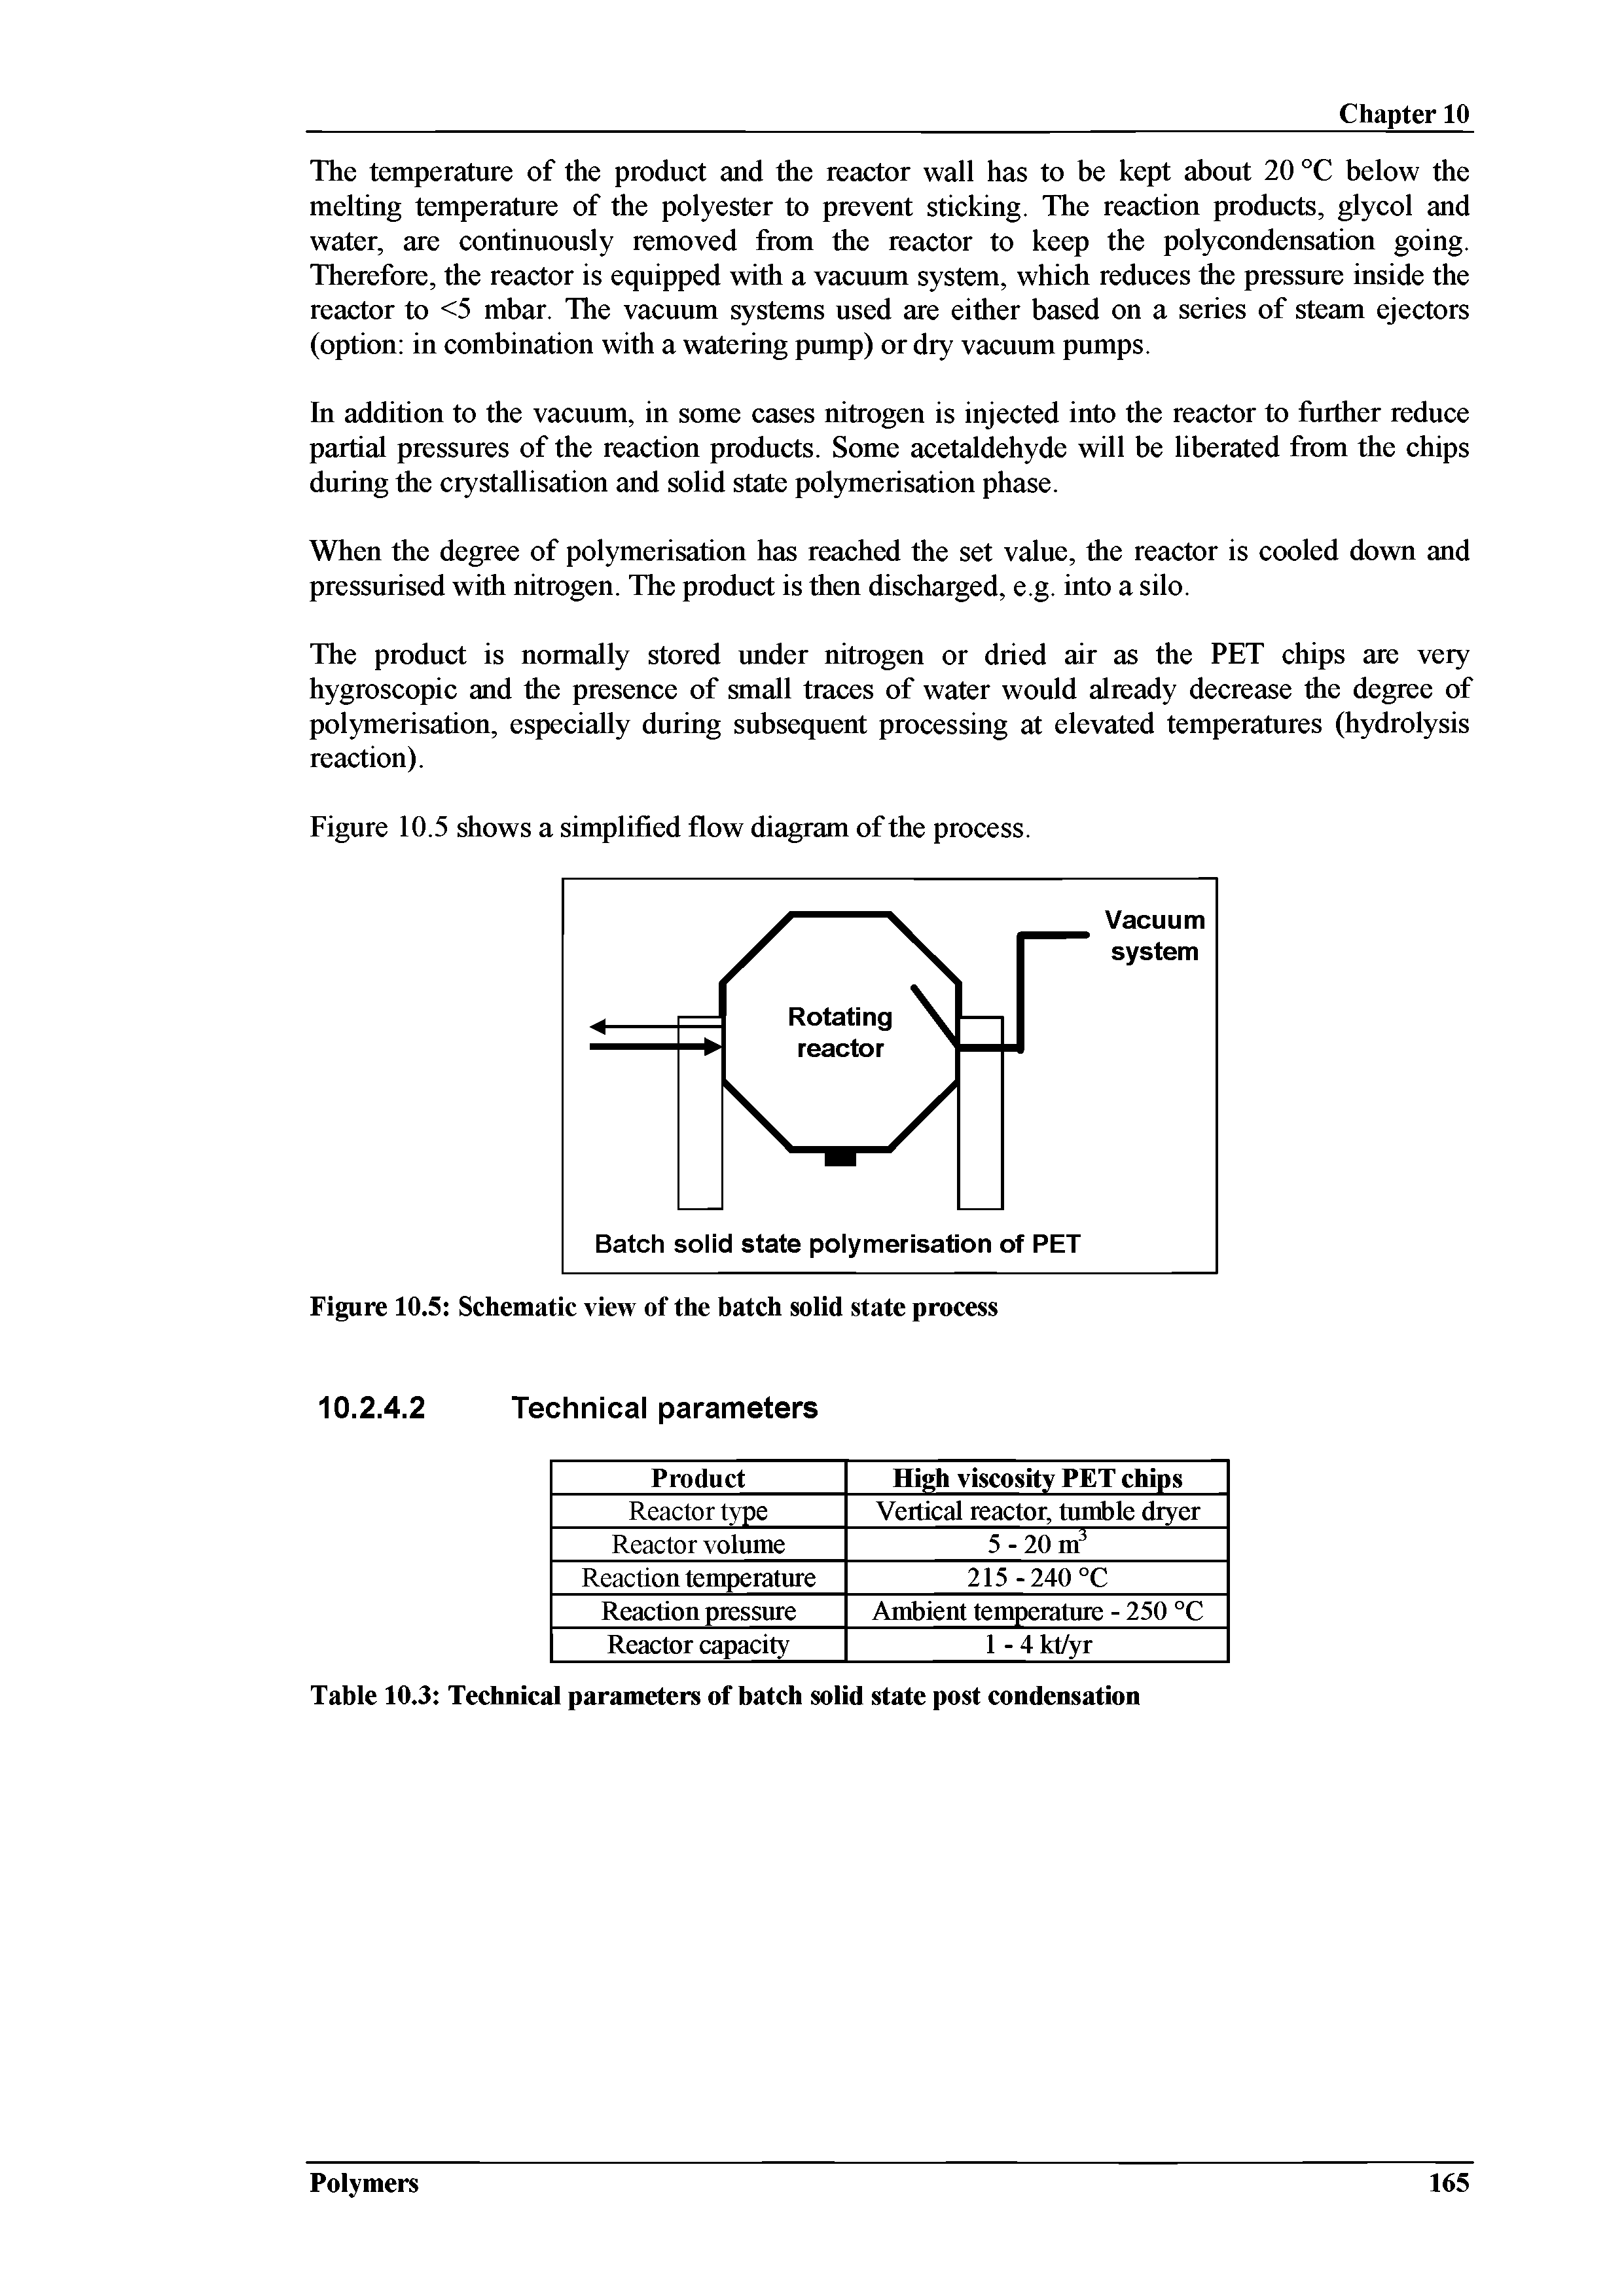 Figure 10.5 Schematic view of the batch solid state process...